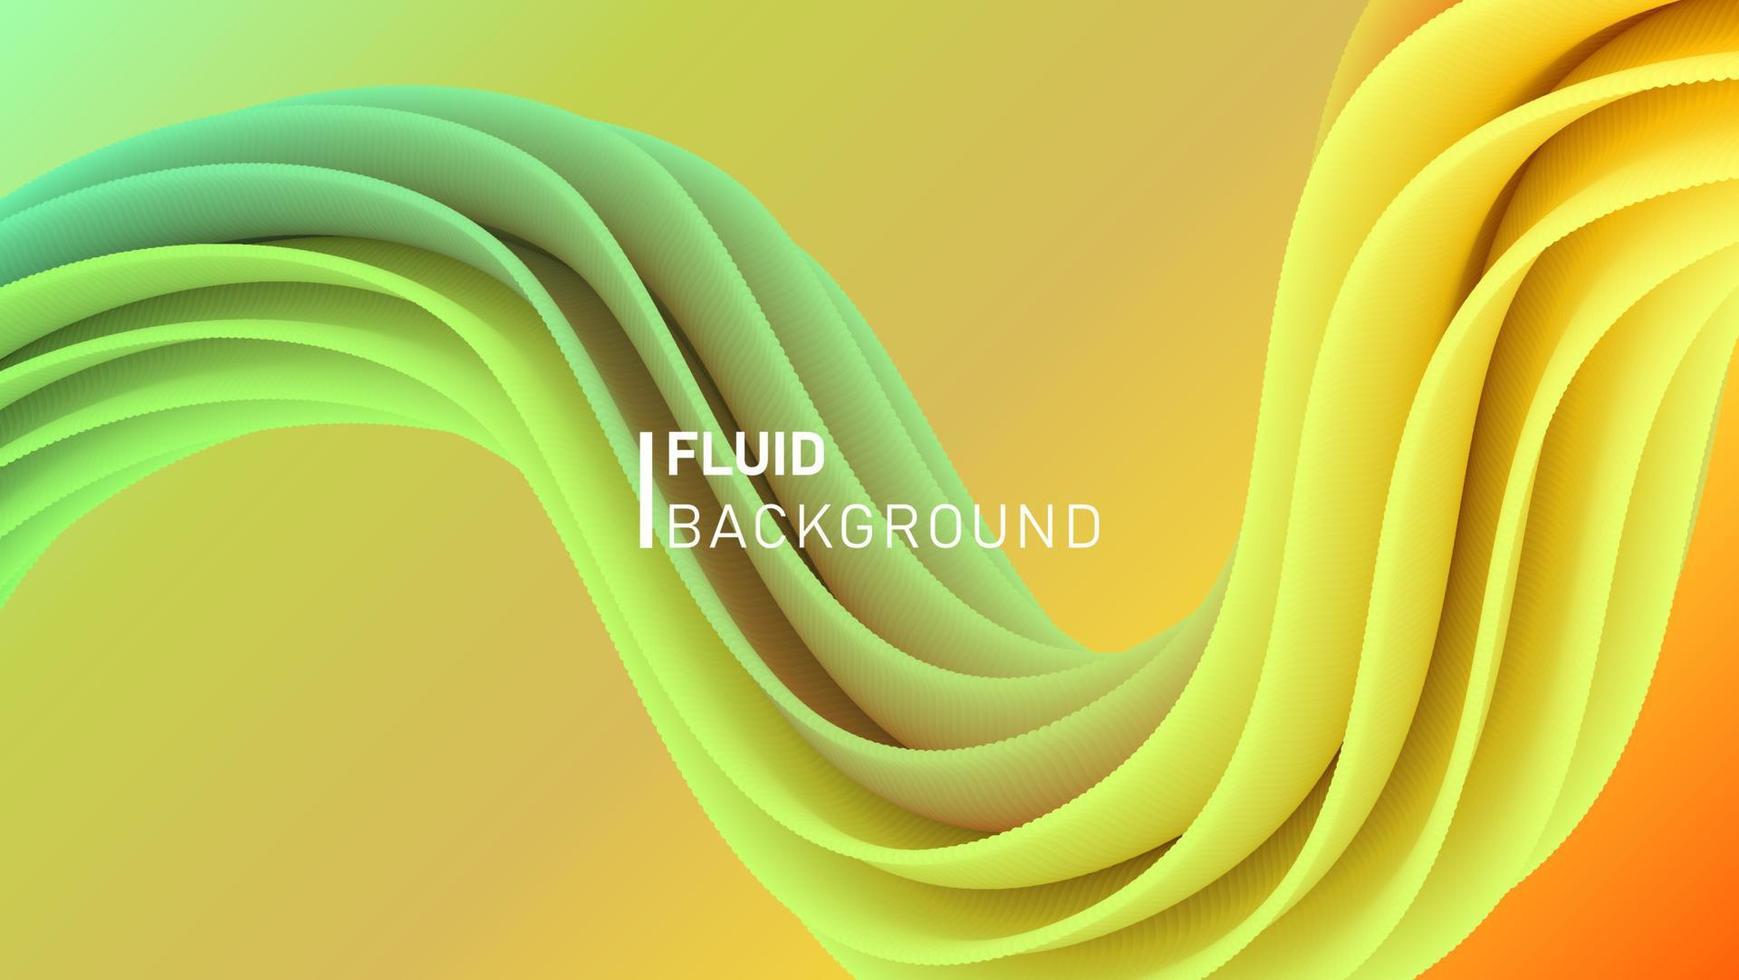 Modern colorful fluid background vector